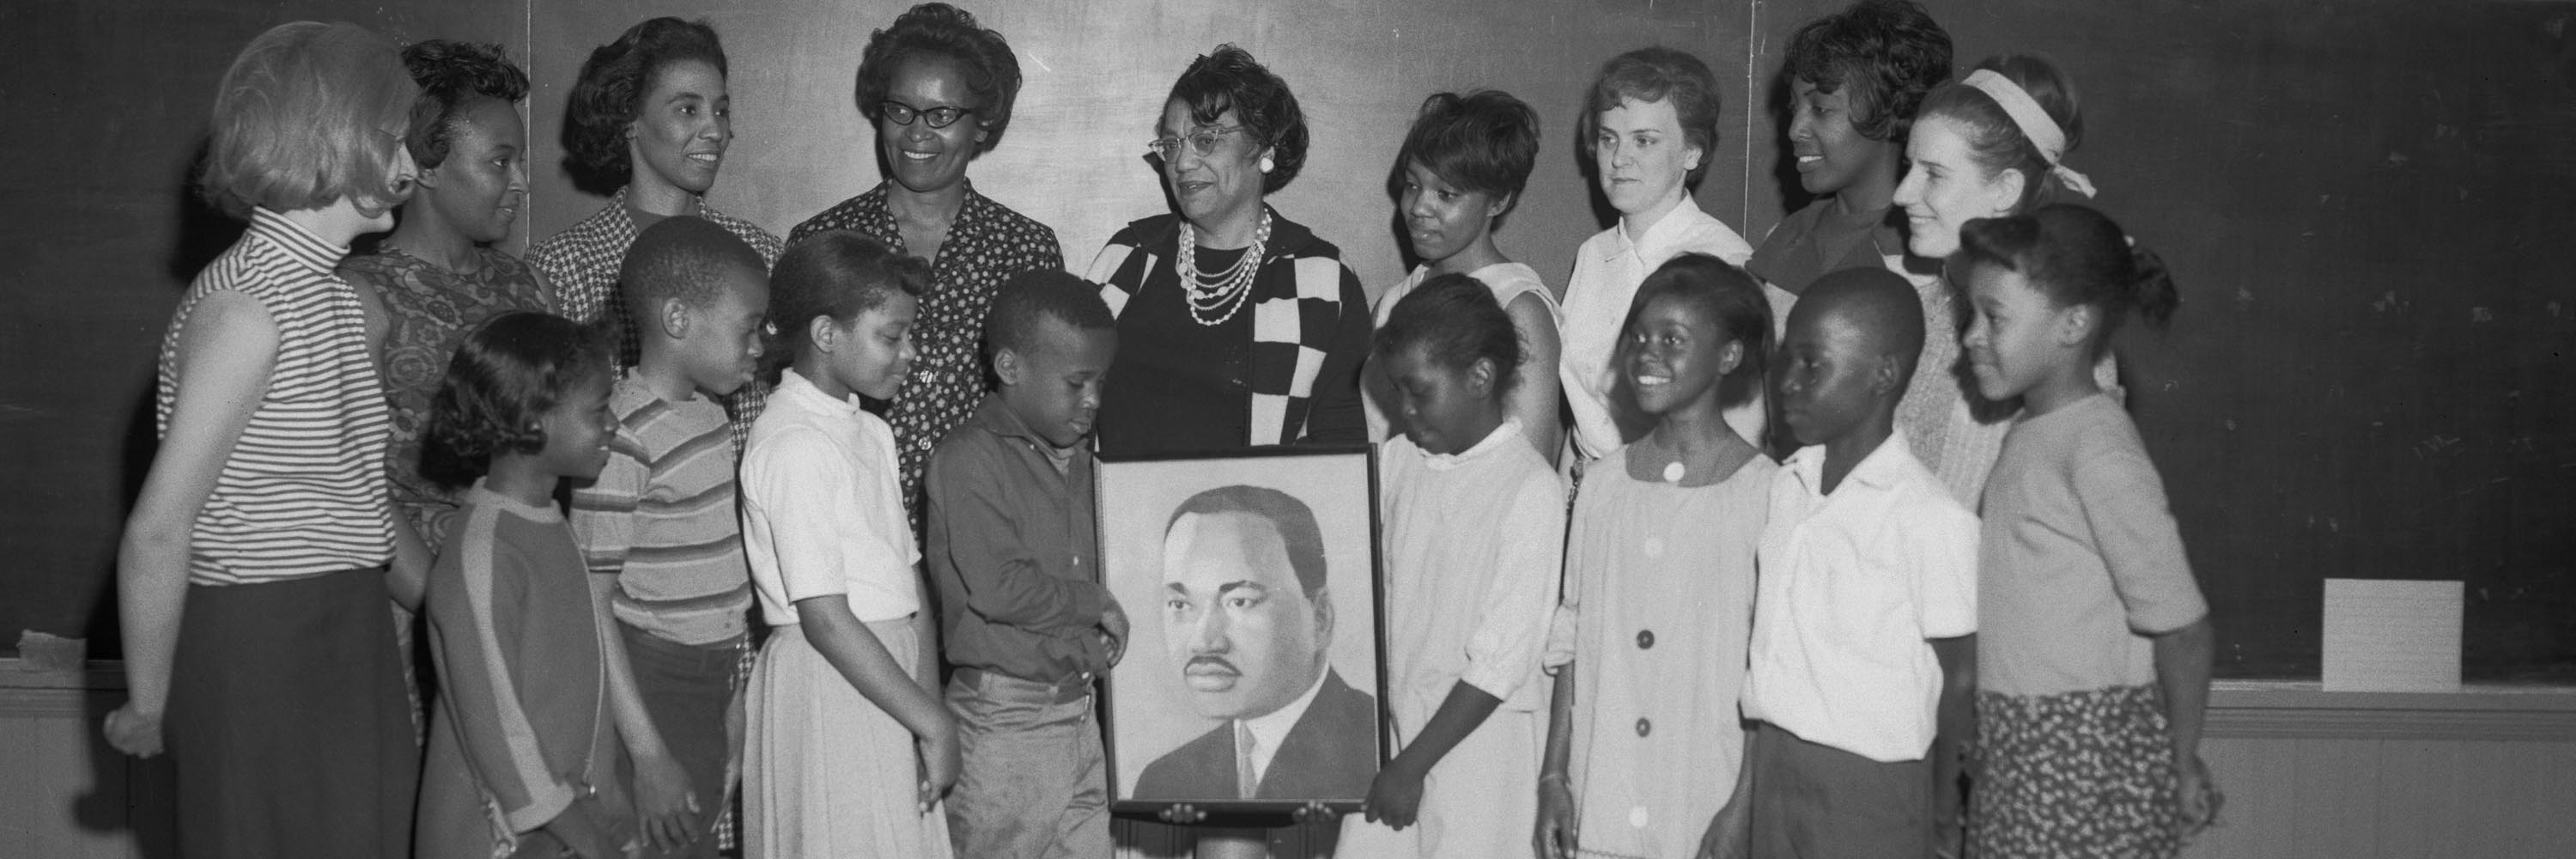 An image of a group gathered around a photo of Martin Luther King Jr., with two children in the front of the group holding up the framed photo.